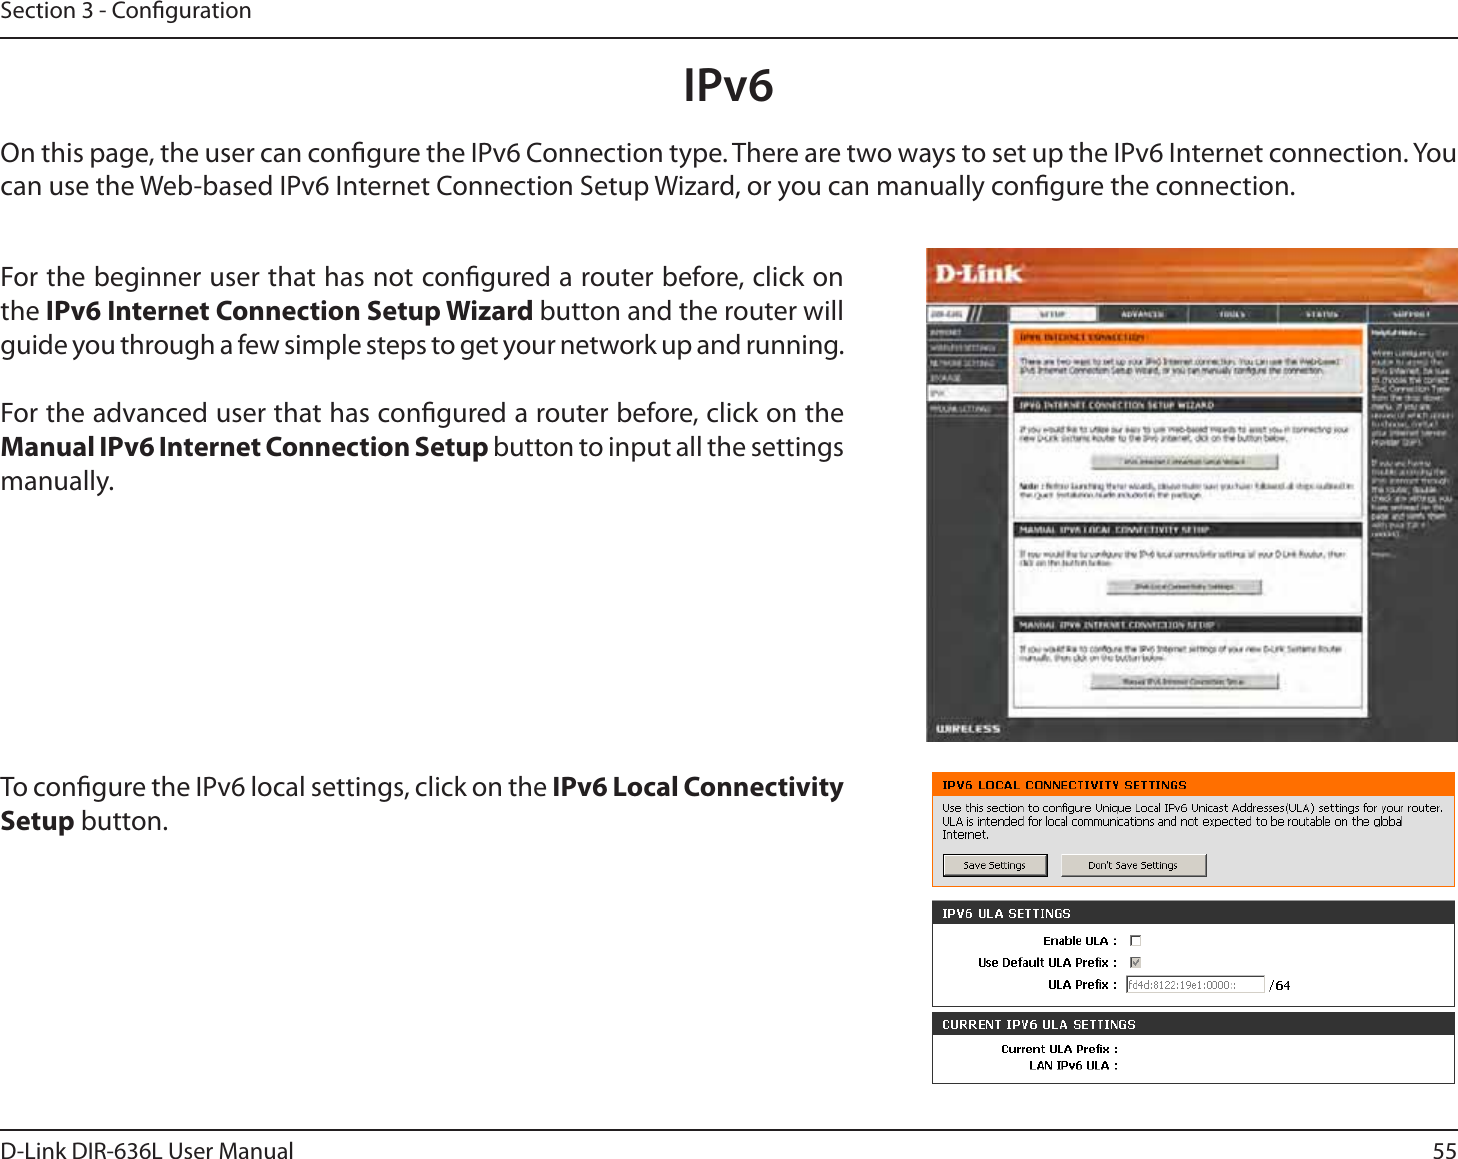 55D-Link DIR-636L User ManualSection 3 - CongurationIPv6On this page, the user can congure the IPv6 Connection type. There are two ways to set up the IPv6 Internet connection. You can use the Web-based IPv6 Internet Connection Setup Wizard, or you can manually congure the connection.For the beginner user that has not congured a router before, click on the IPv6 Internet Connection Setup Wizard button and the router will guide you through a few simple steps to get your network up and running.For the advanced user that has congured a router before, click on the Manual IPv6 Internet Connection Setup button to input all the settings manually.To congure the IPv6 local settings, click on the IPv6 Local Connectivity Setup button.